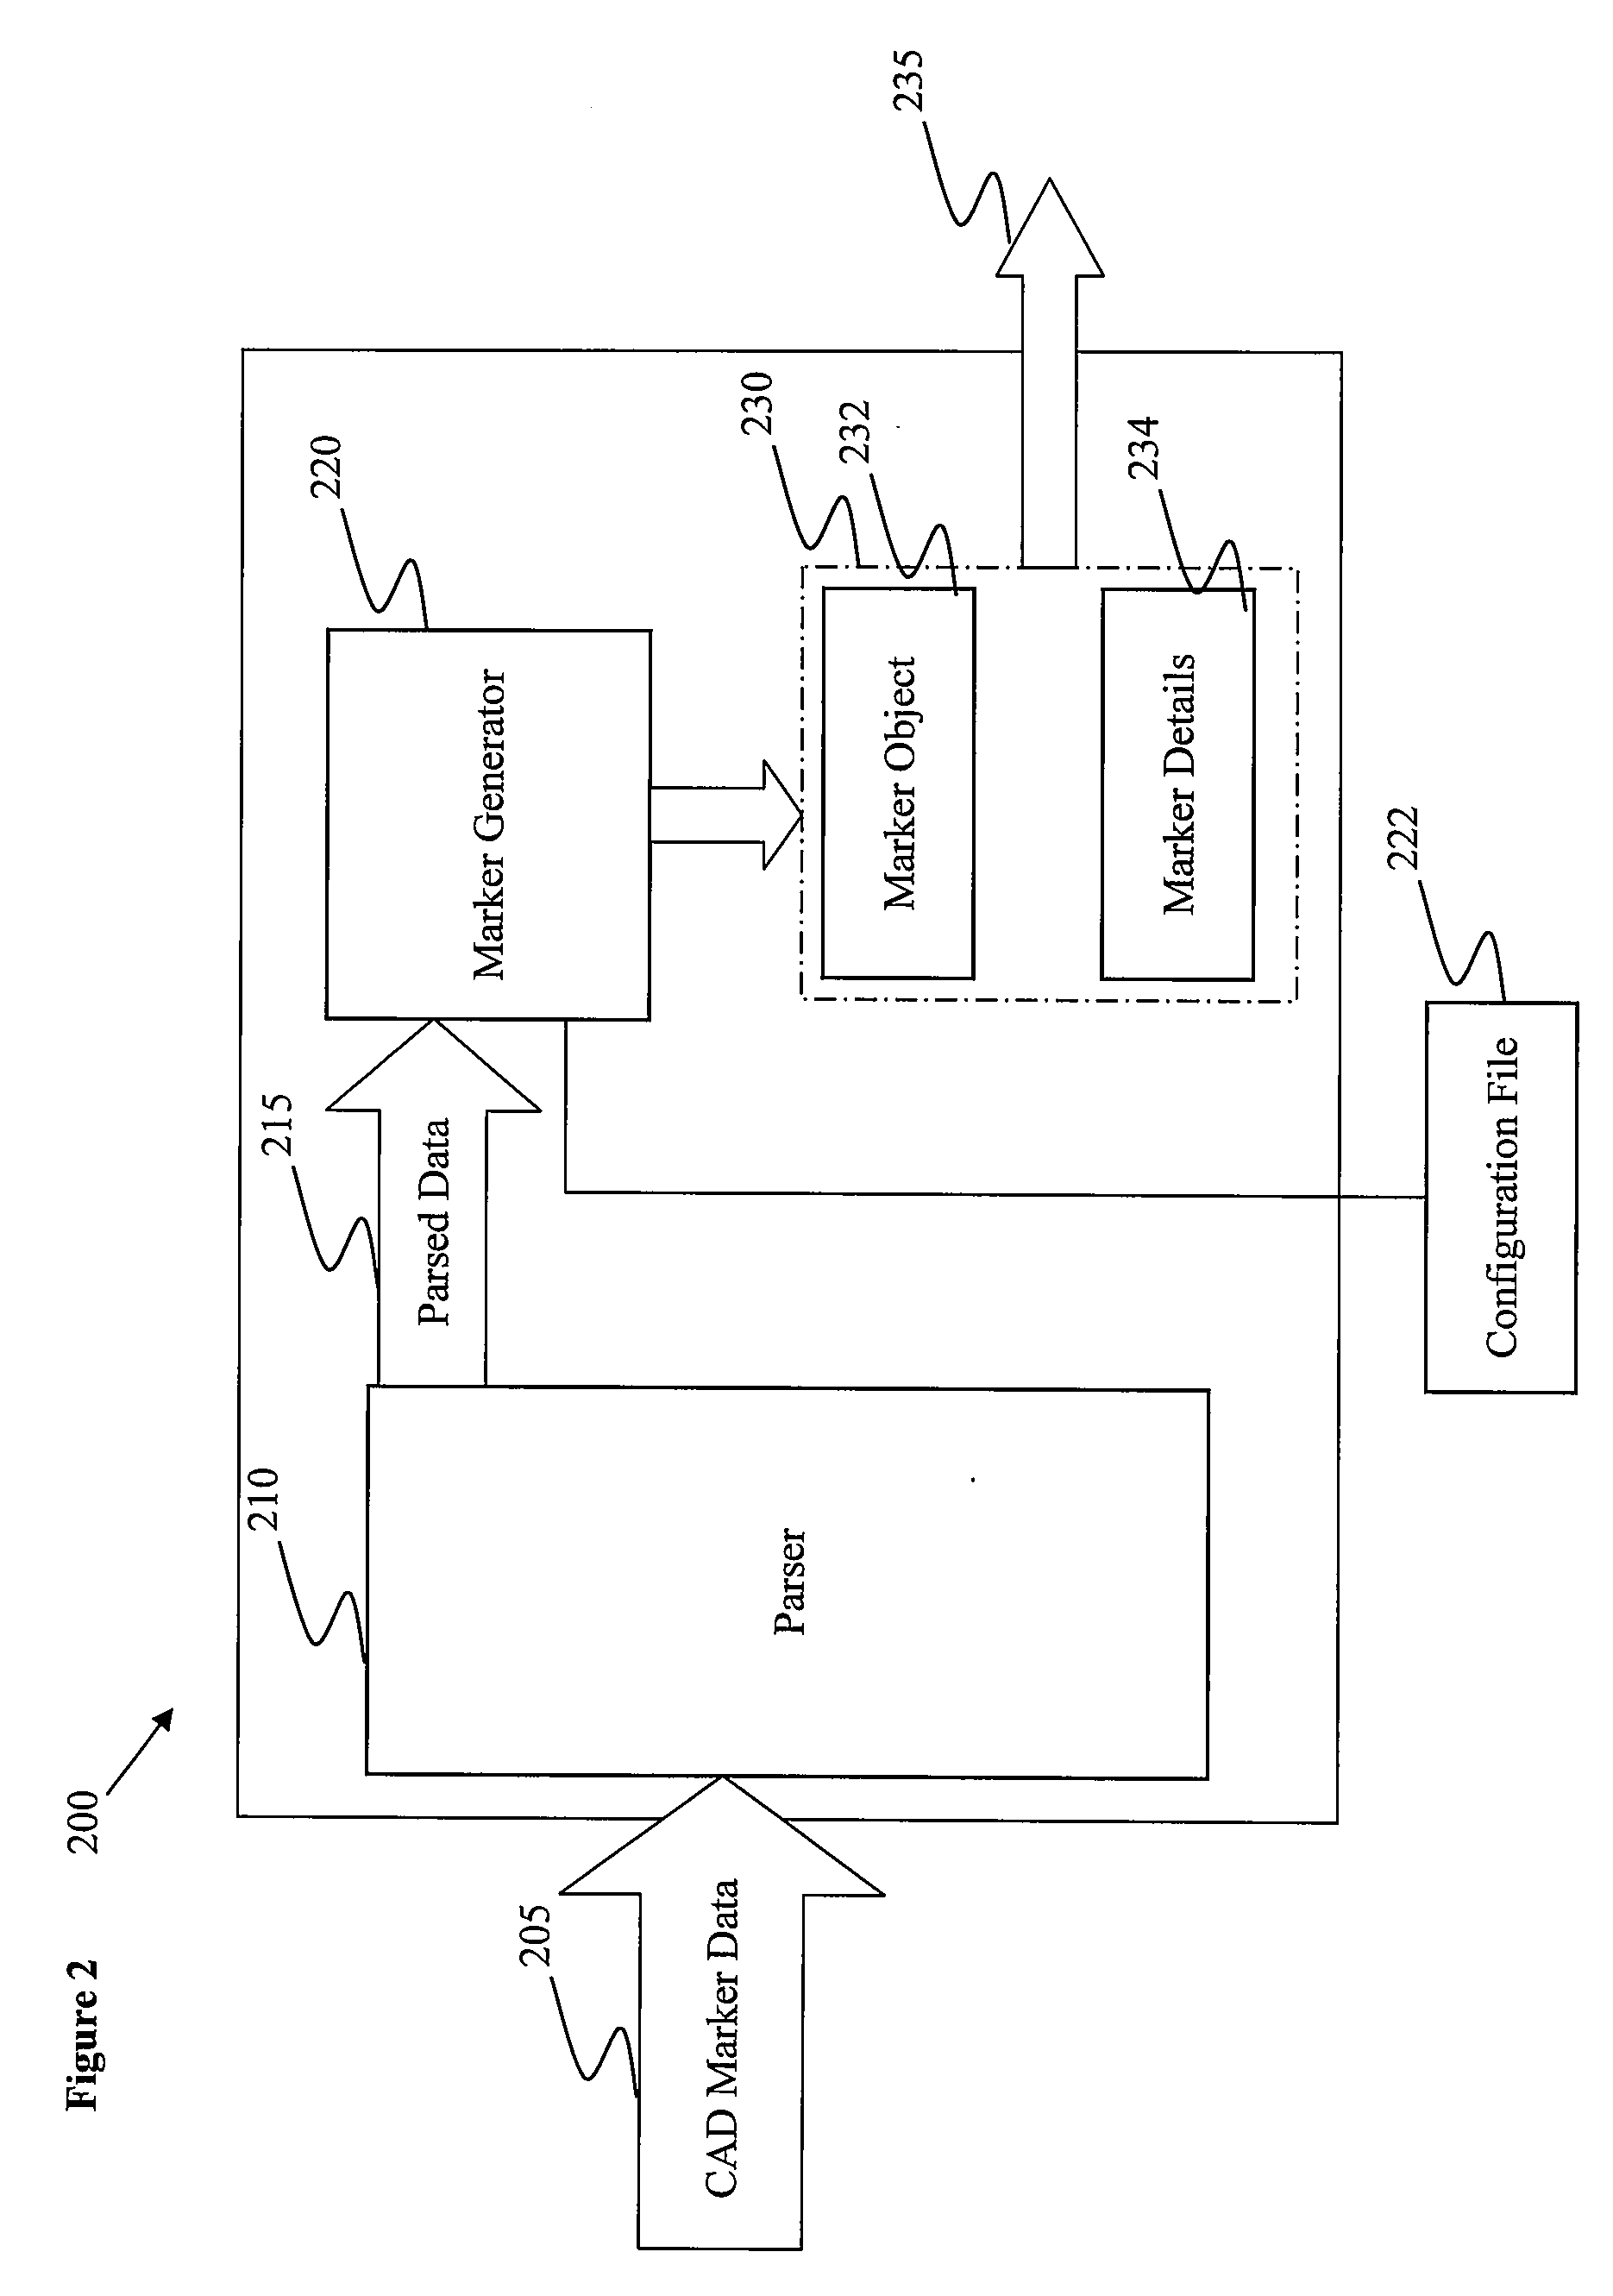 Systems and Methods For Generating Vendor-Independent Computer-Aided Diagnosis Markers